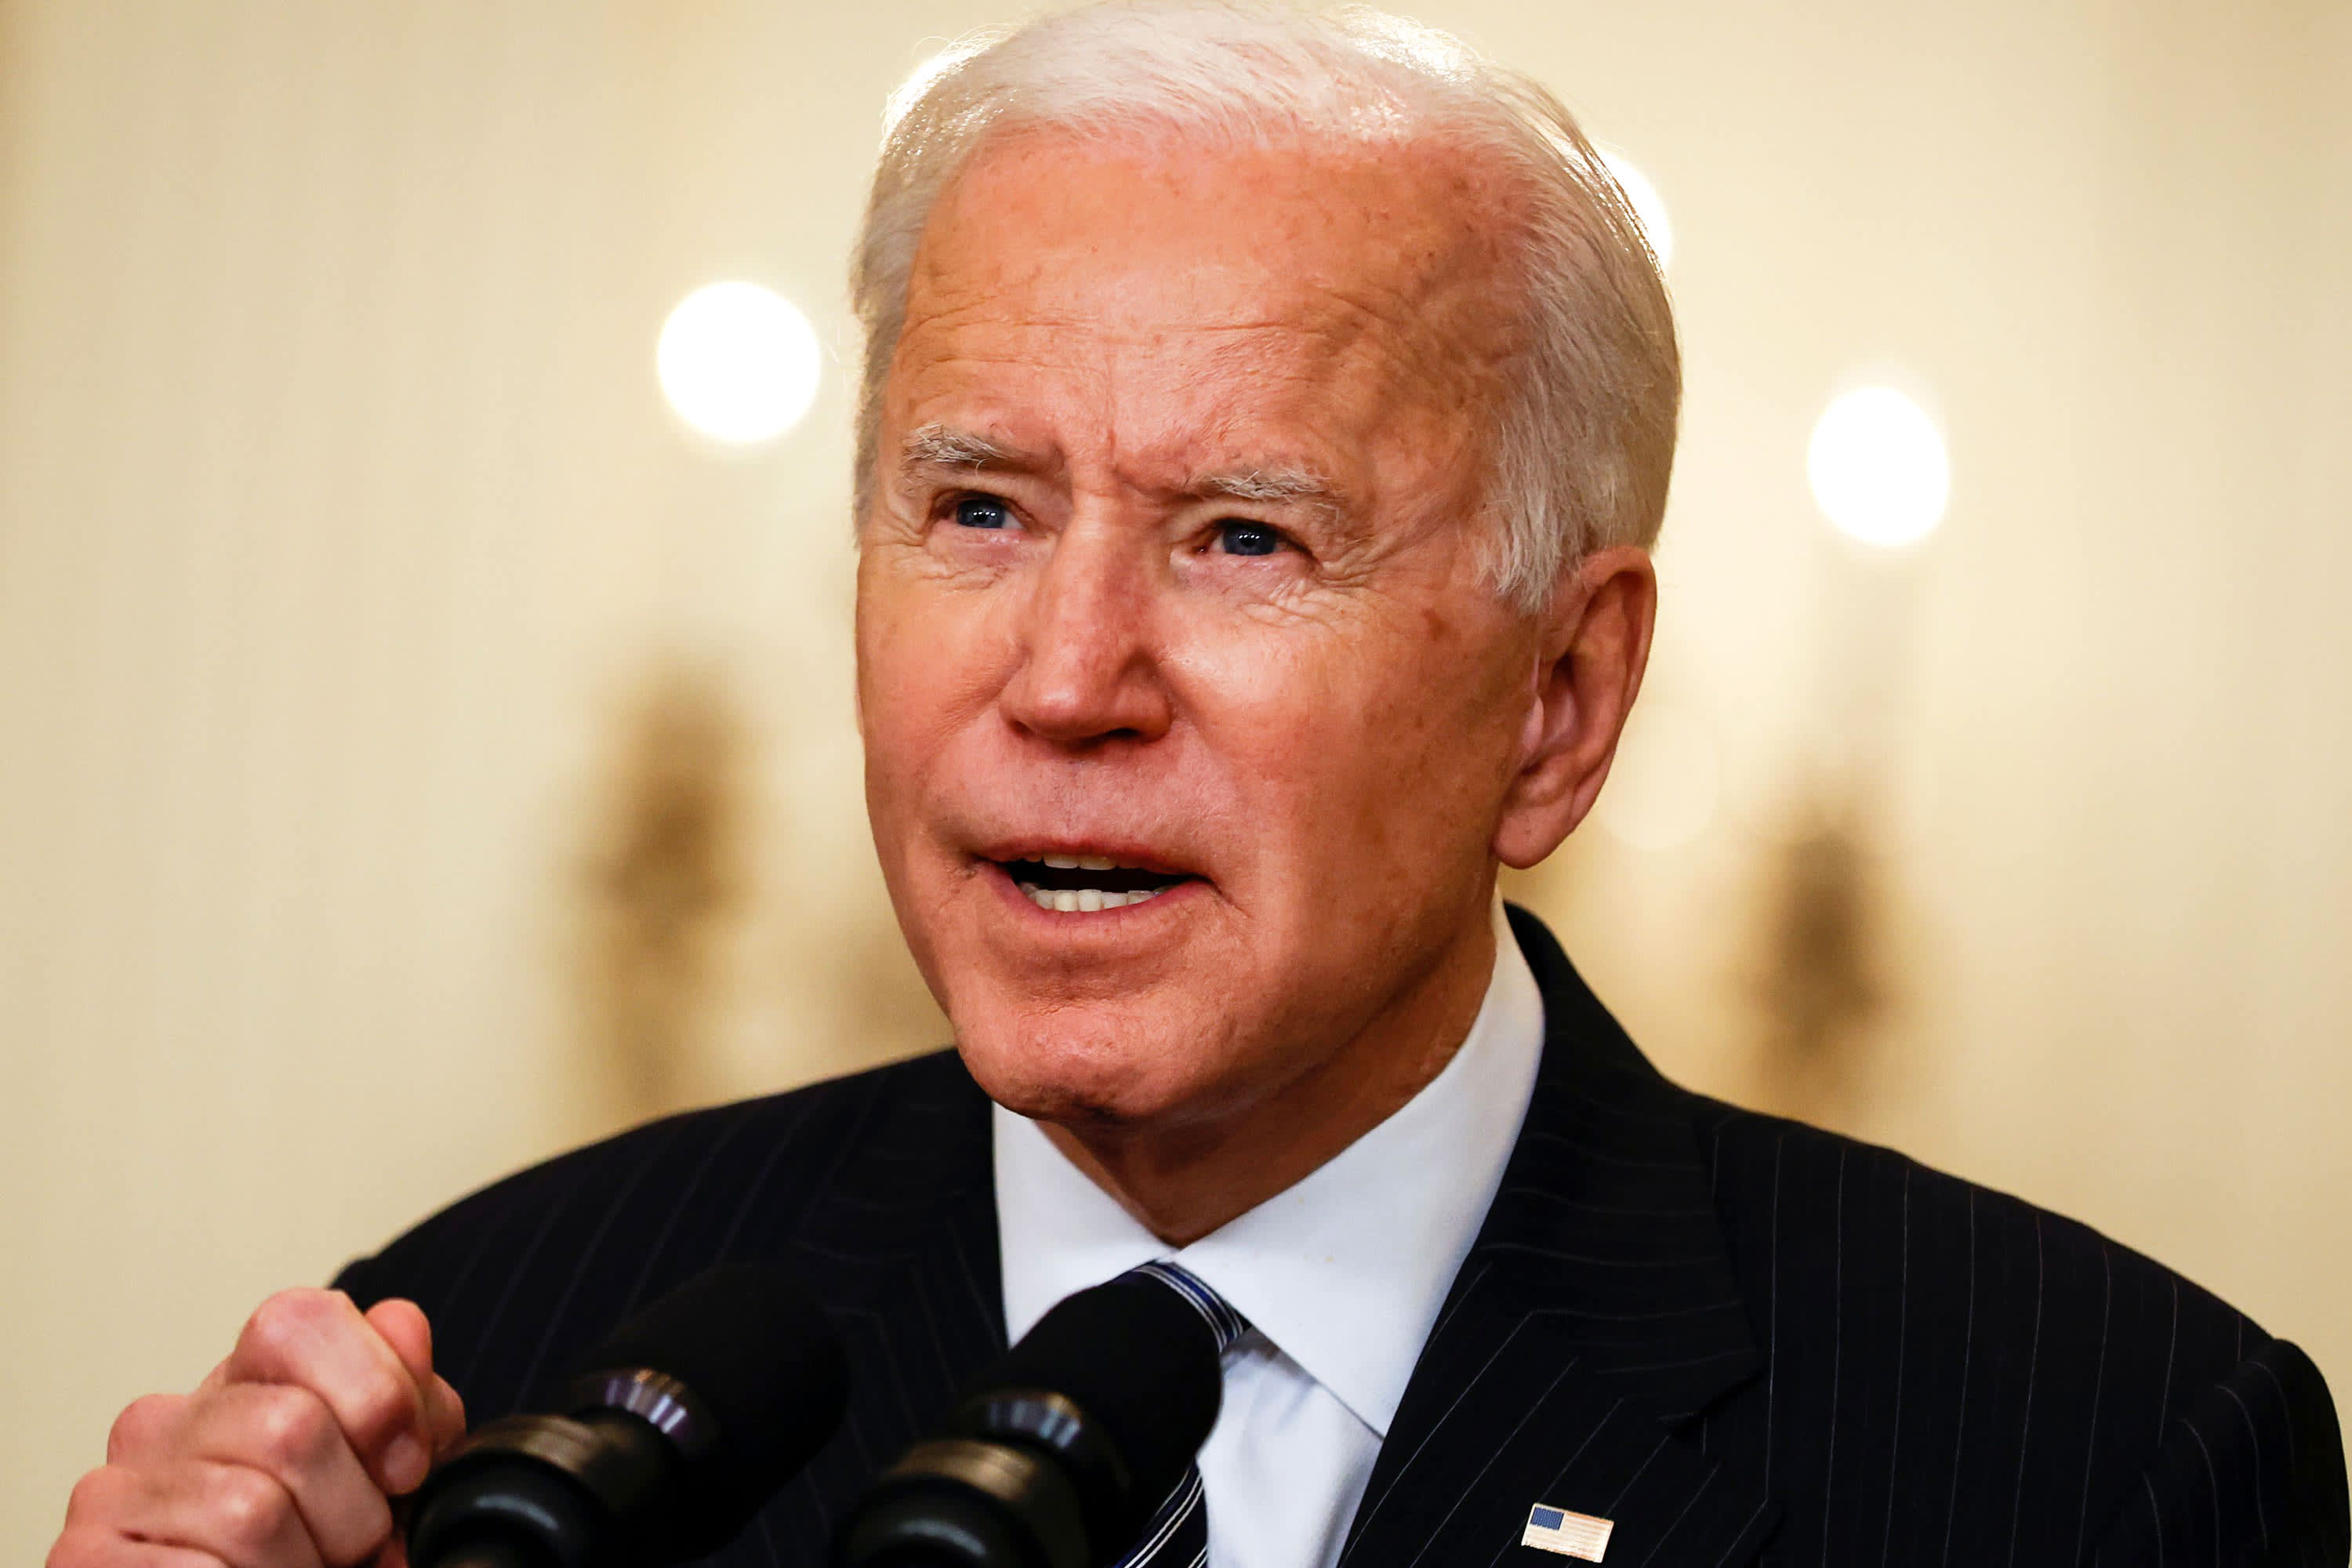 Biden’s closest advisers have ties to large companies, with some earning millions